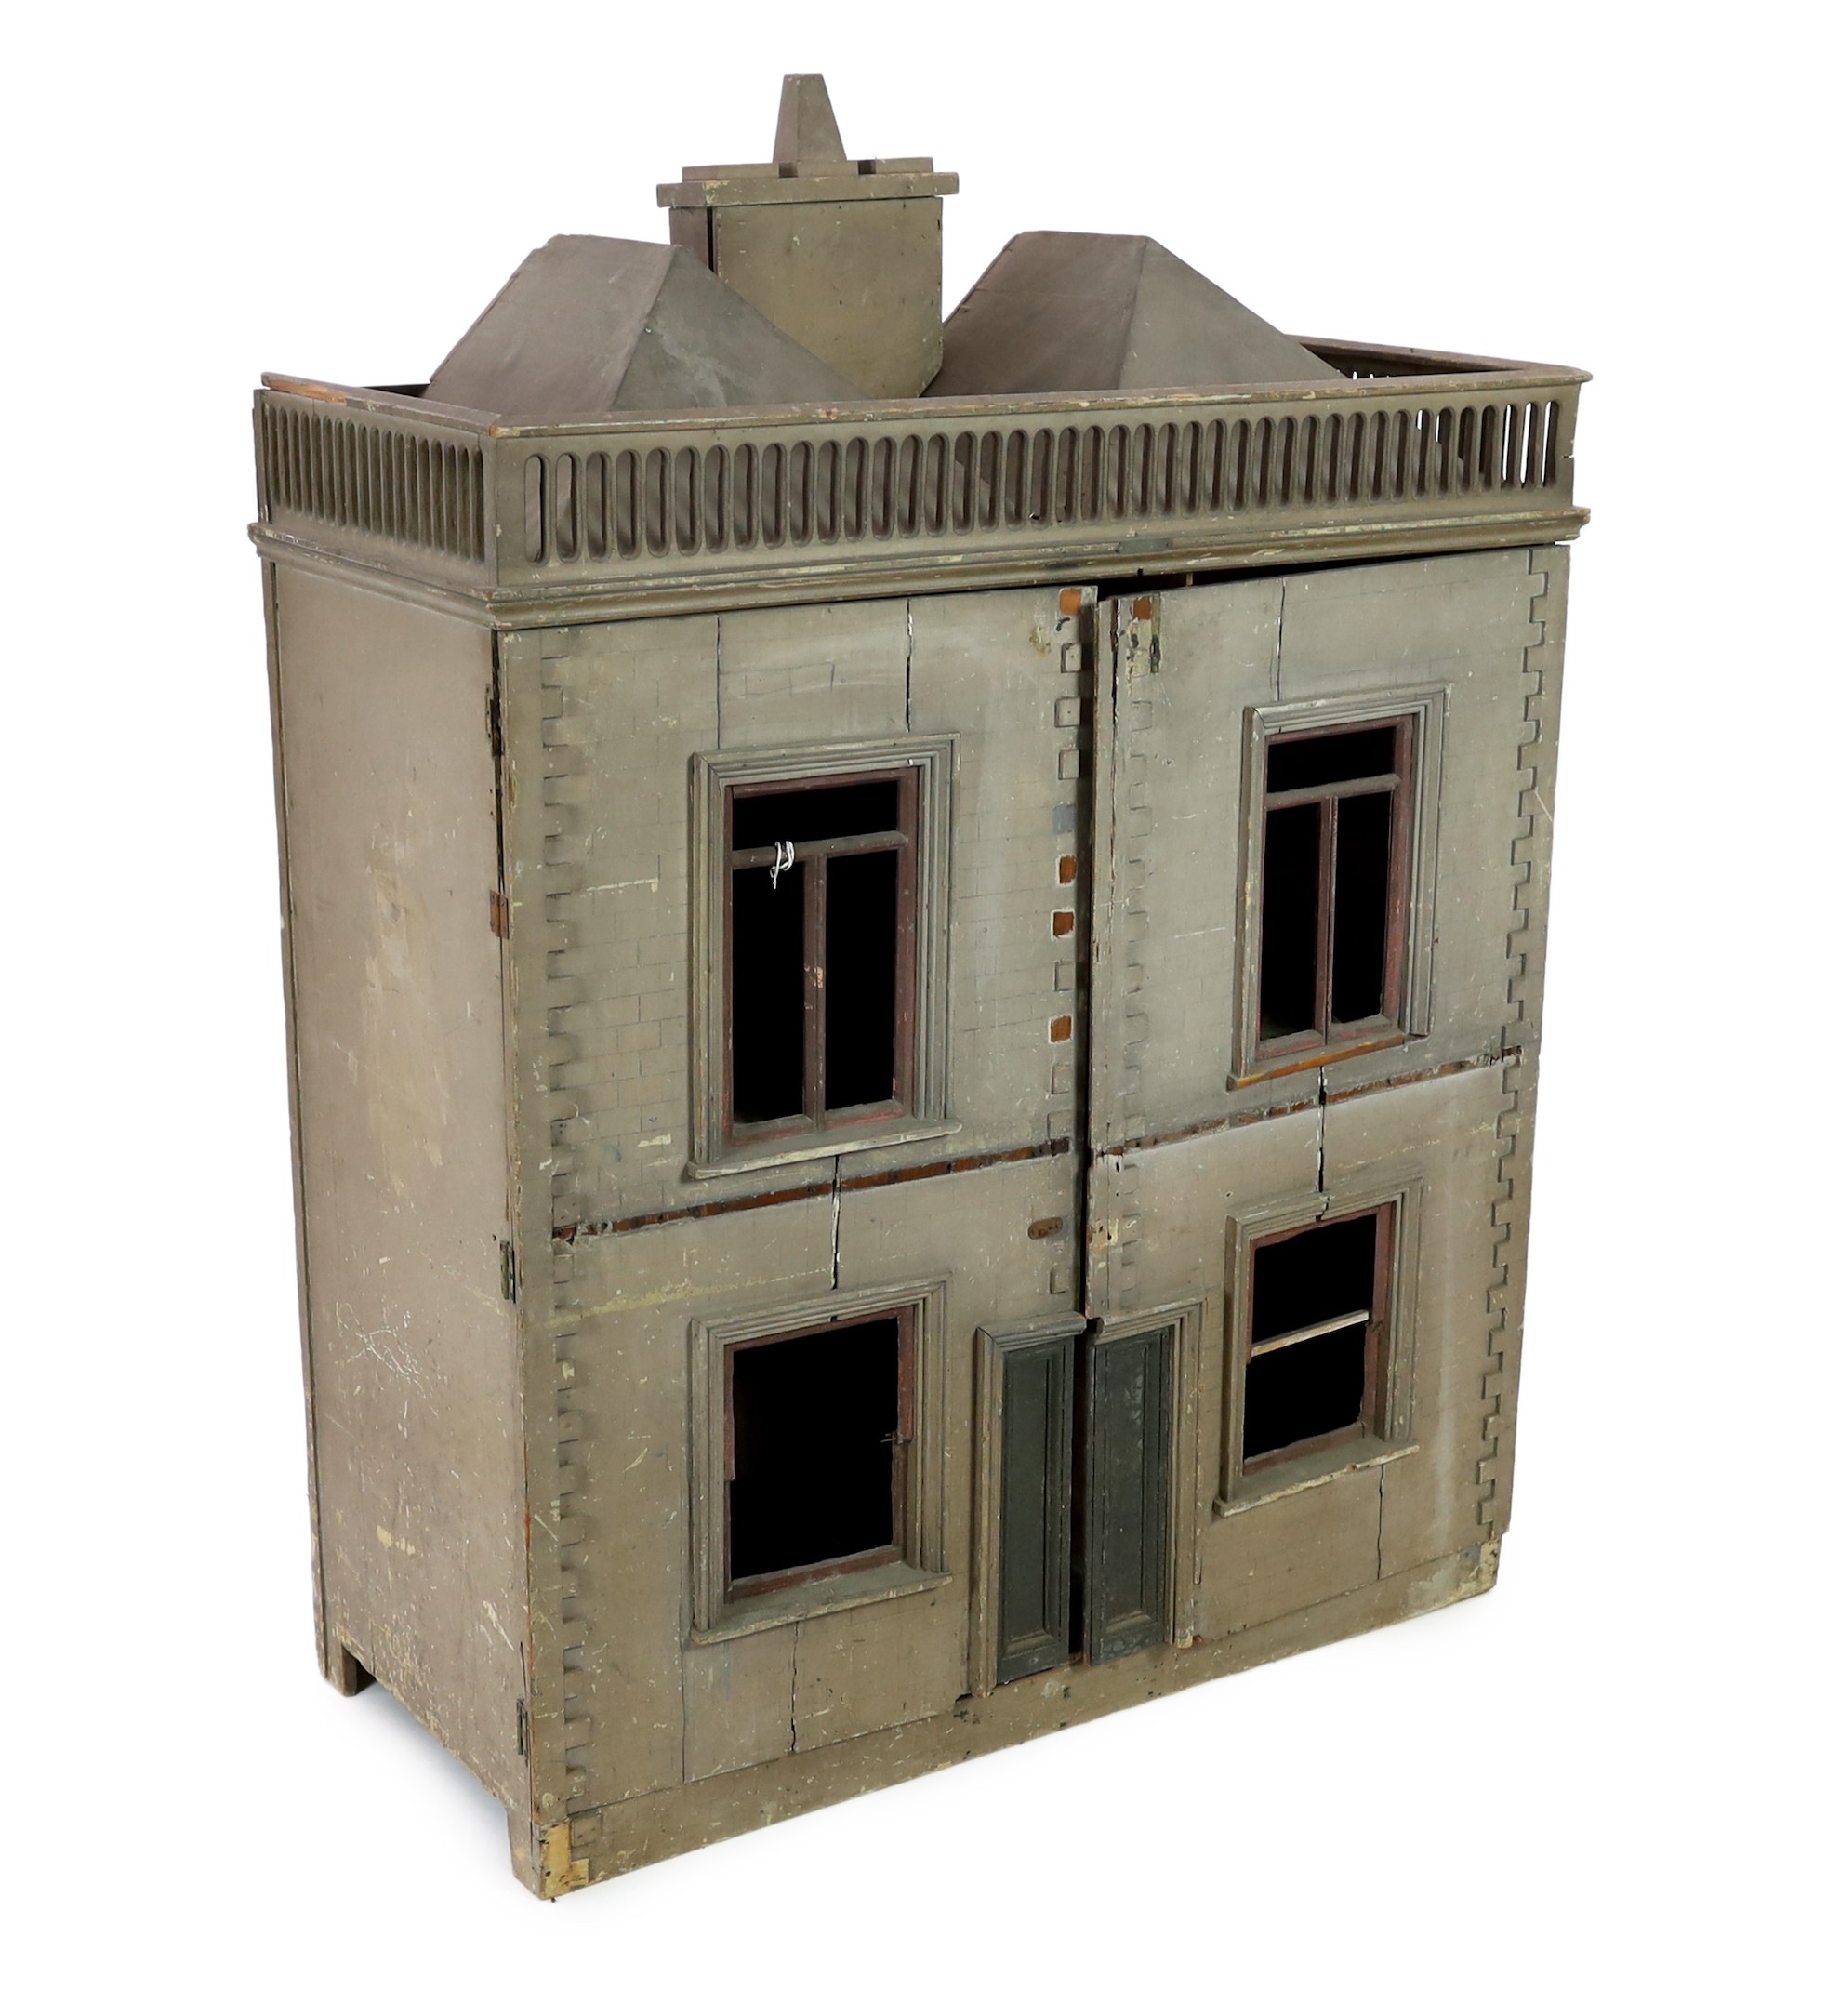 A very large English dolls’ house, circa 1840-1850, with a central panelled door and large windows - Image 2 of 10